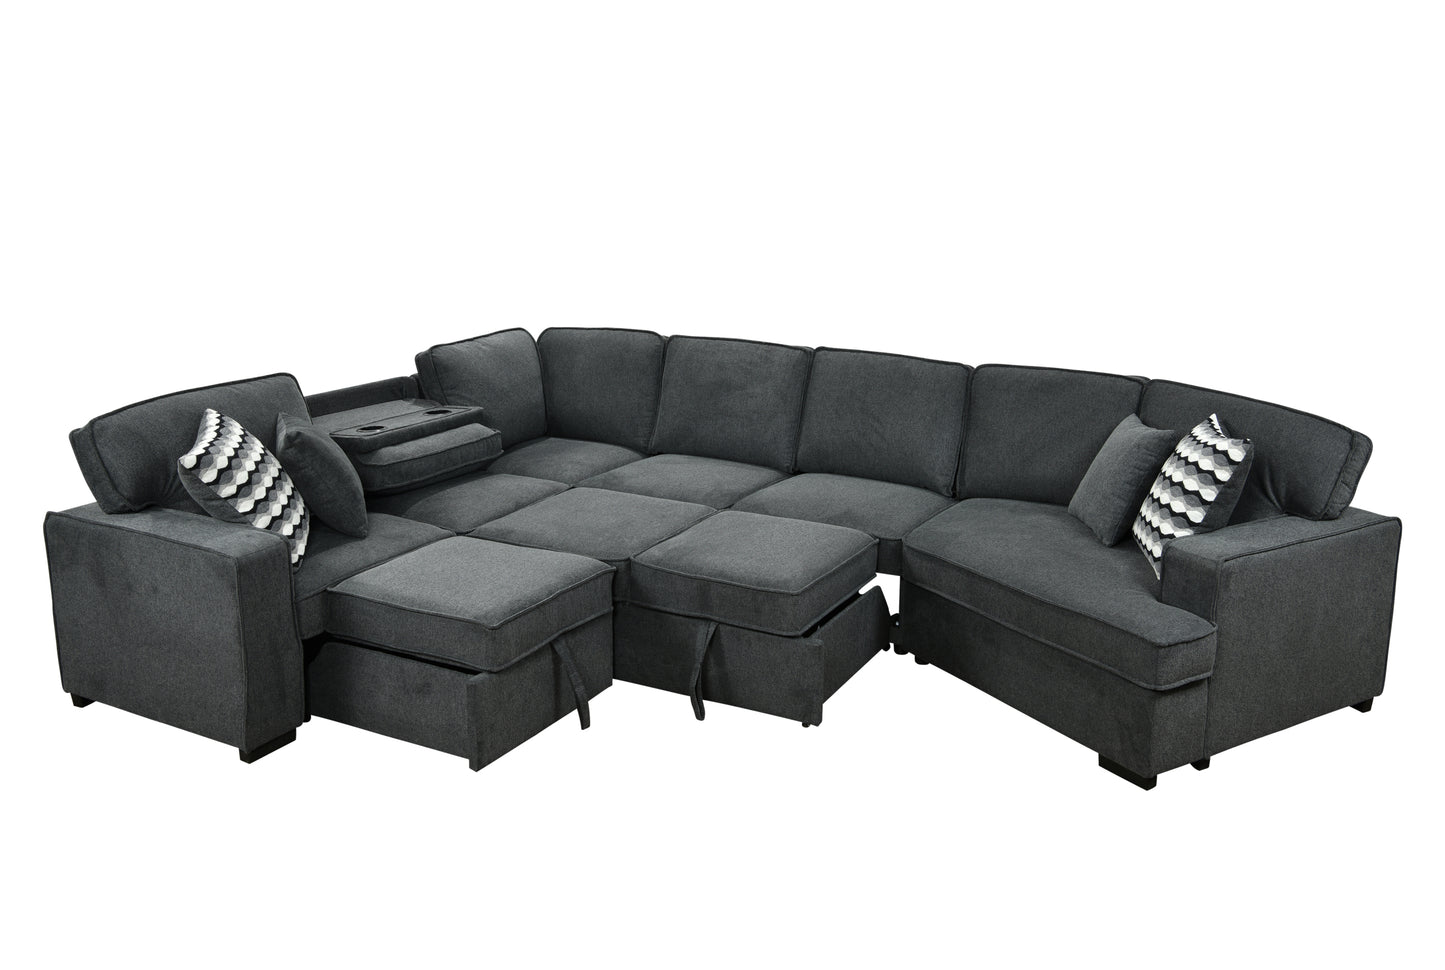 Oversized Upholstered Sectional Pull Out Sleeper Bed and Chaise Lounge, U-Shaped Sofa with 2 pull-out bed, 4 Pillows & 2 Cup Holders on Back Cushions for Home, Bedroom, Apartment, Dark Gray